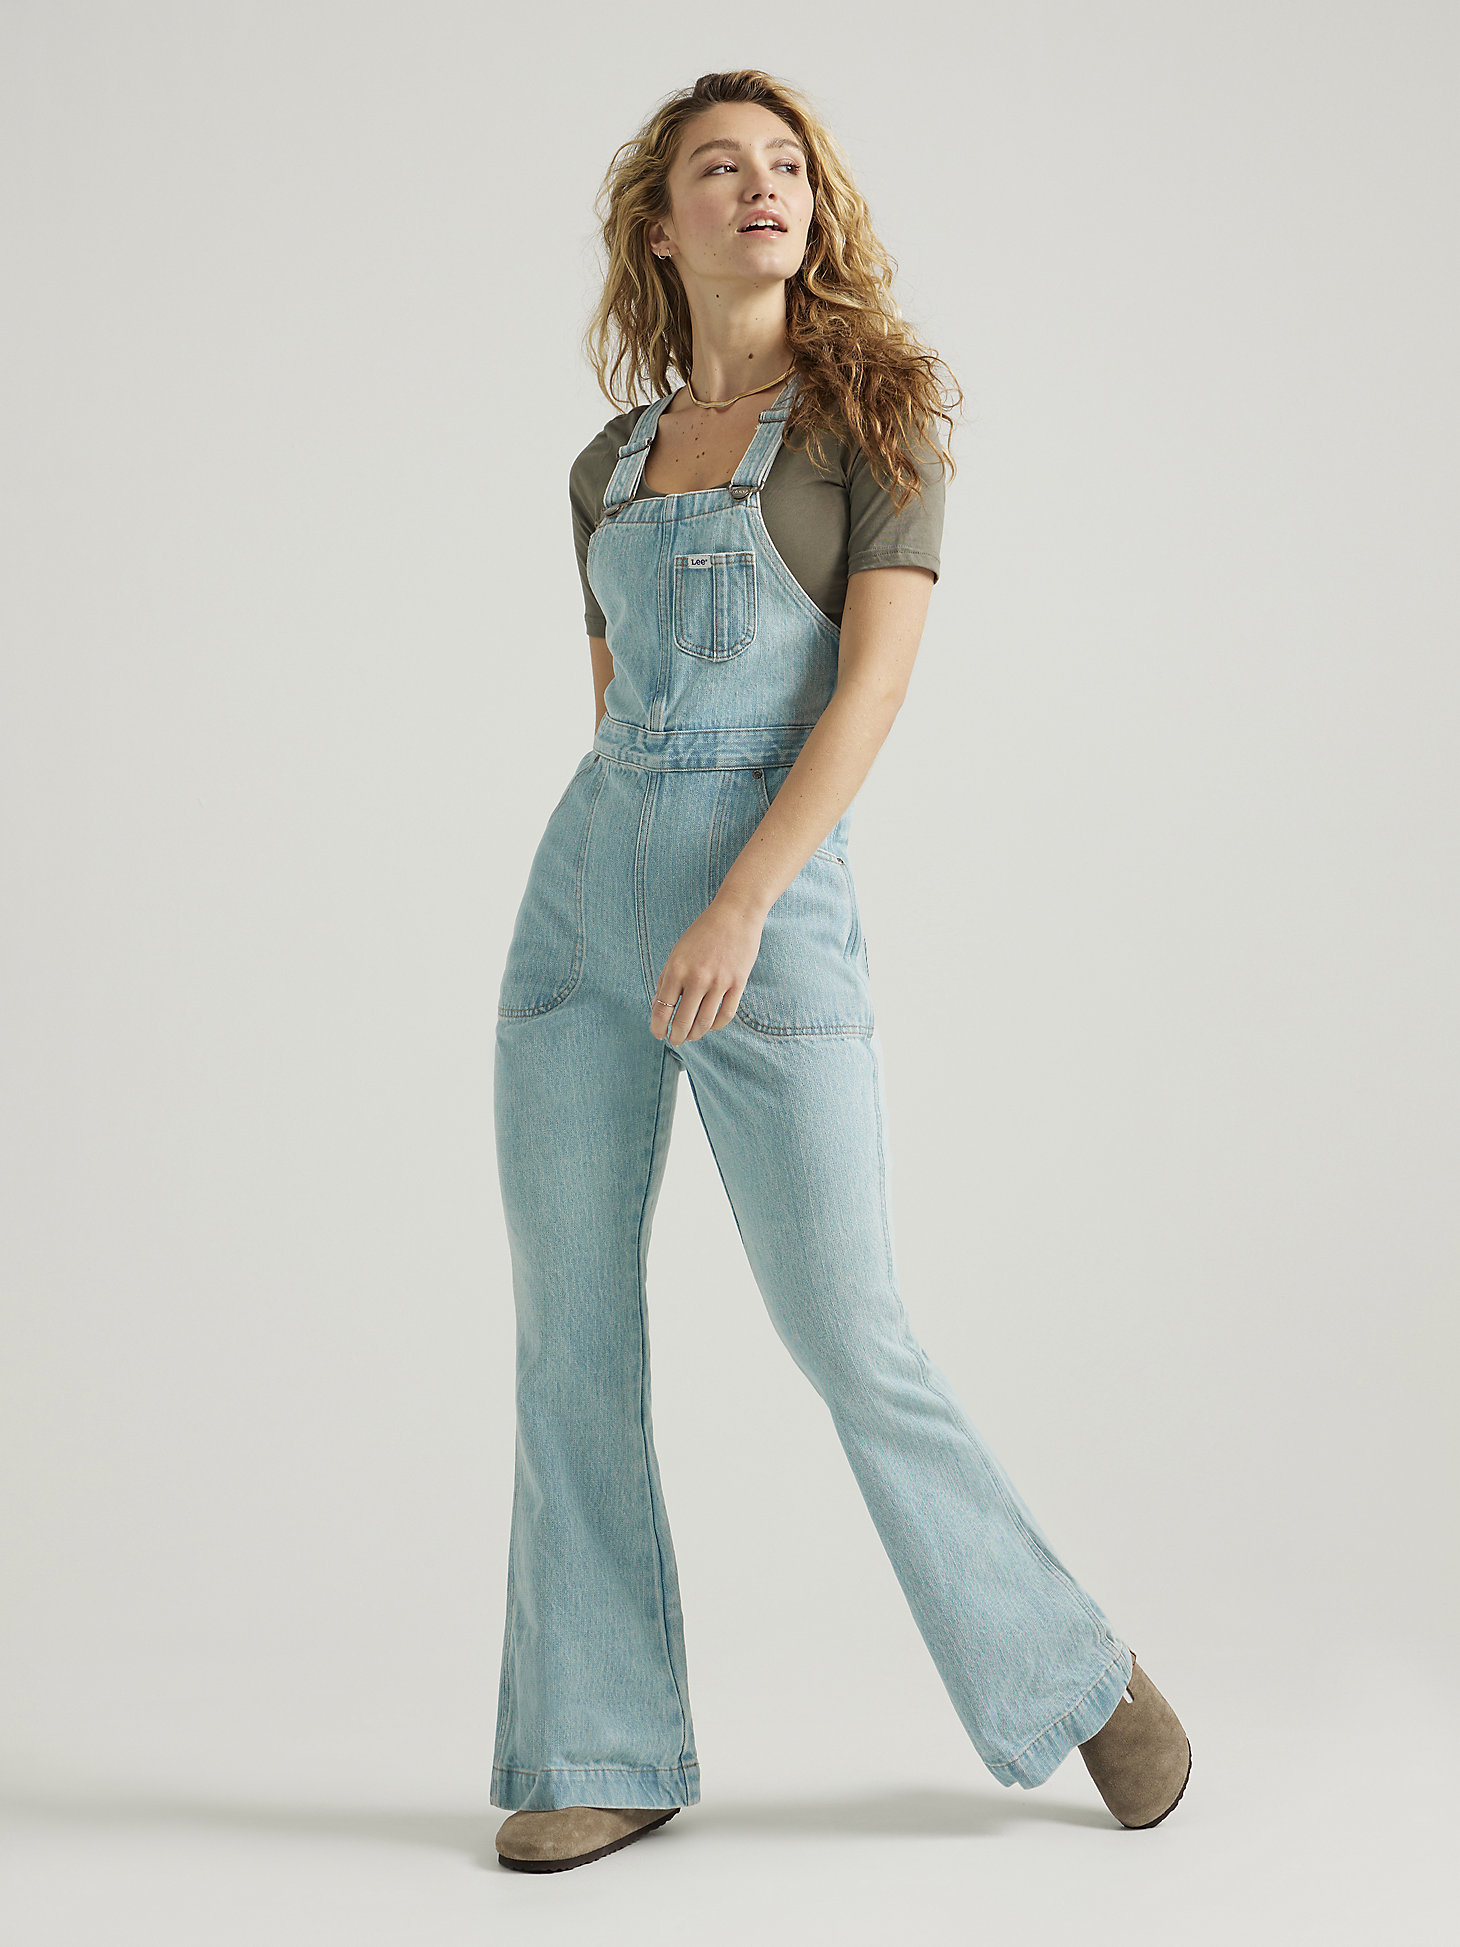 Women's Lee European Collection Factory Flare Overall in Vibrant Blues alternative view 7